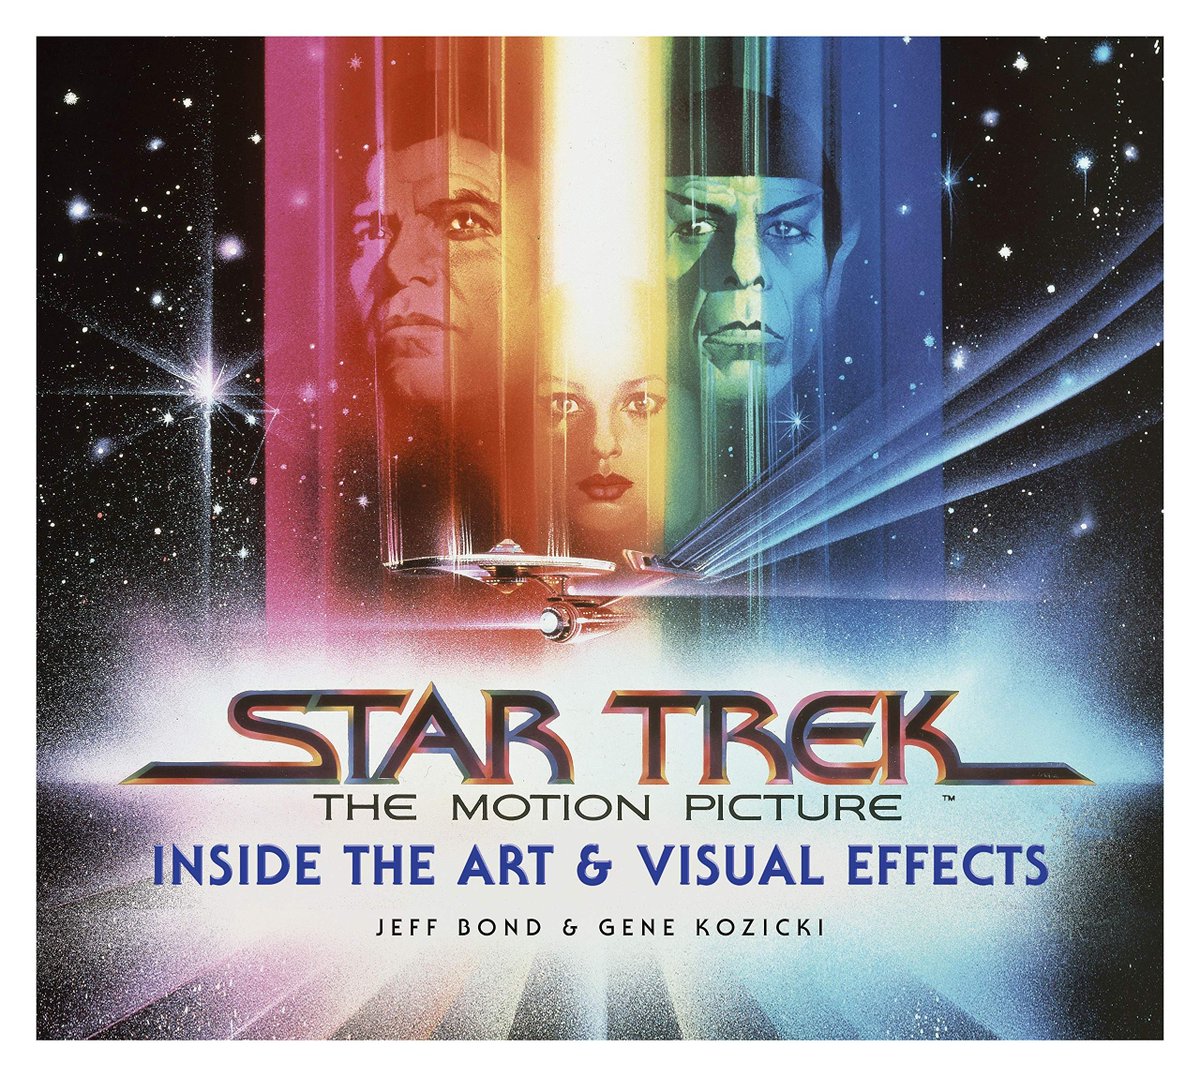 Back to Trek!Star Trek: The Motion Picture: The Art and Visual Effects by Jeff Bond and Gene Kozicki for Titan Books is a must have. This 1979 movie deserved to have such a great book, four decades late.